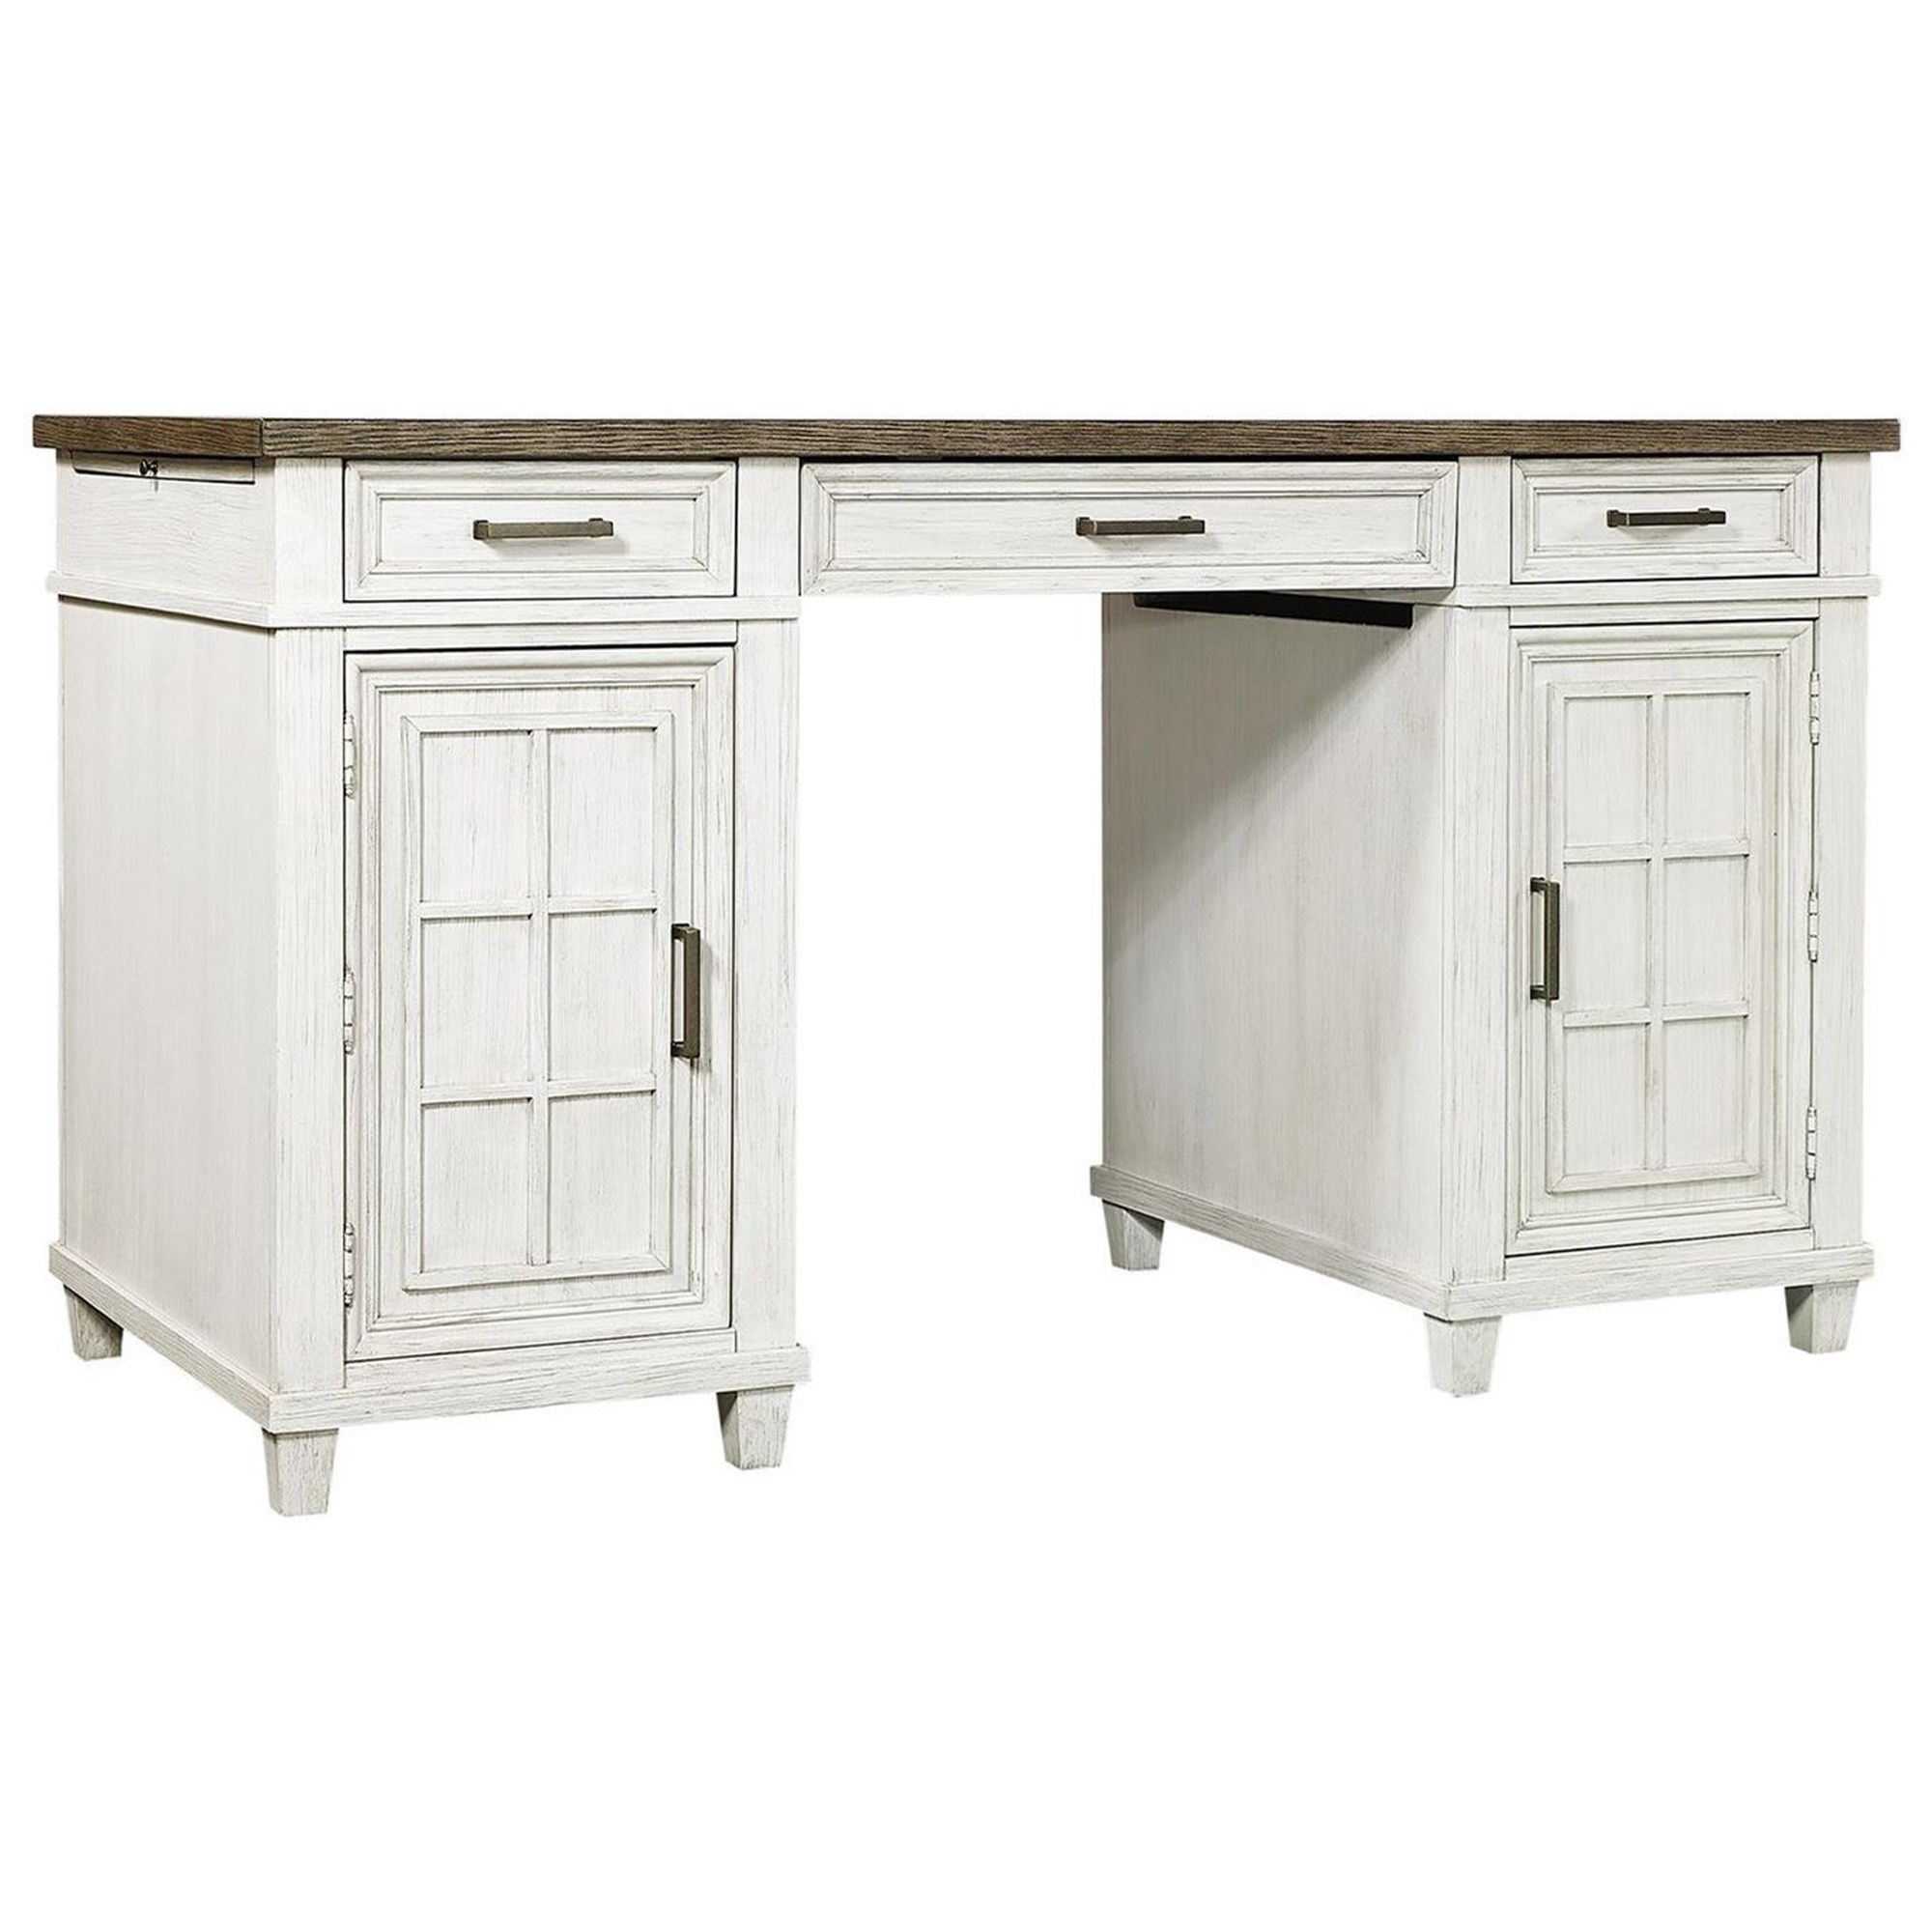 Outlets Furniture - Work Height Desk Table Caraway 248303492 | Desk 2 Farmhouse | Belfort AC Desks with Aspenhome Pullout Surface and Counter